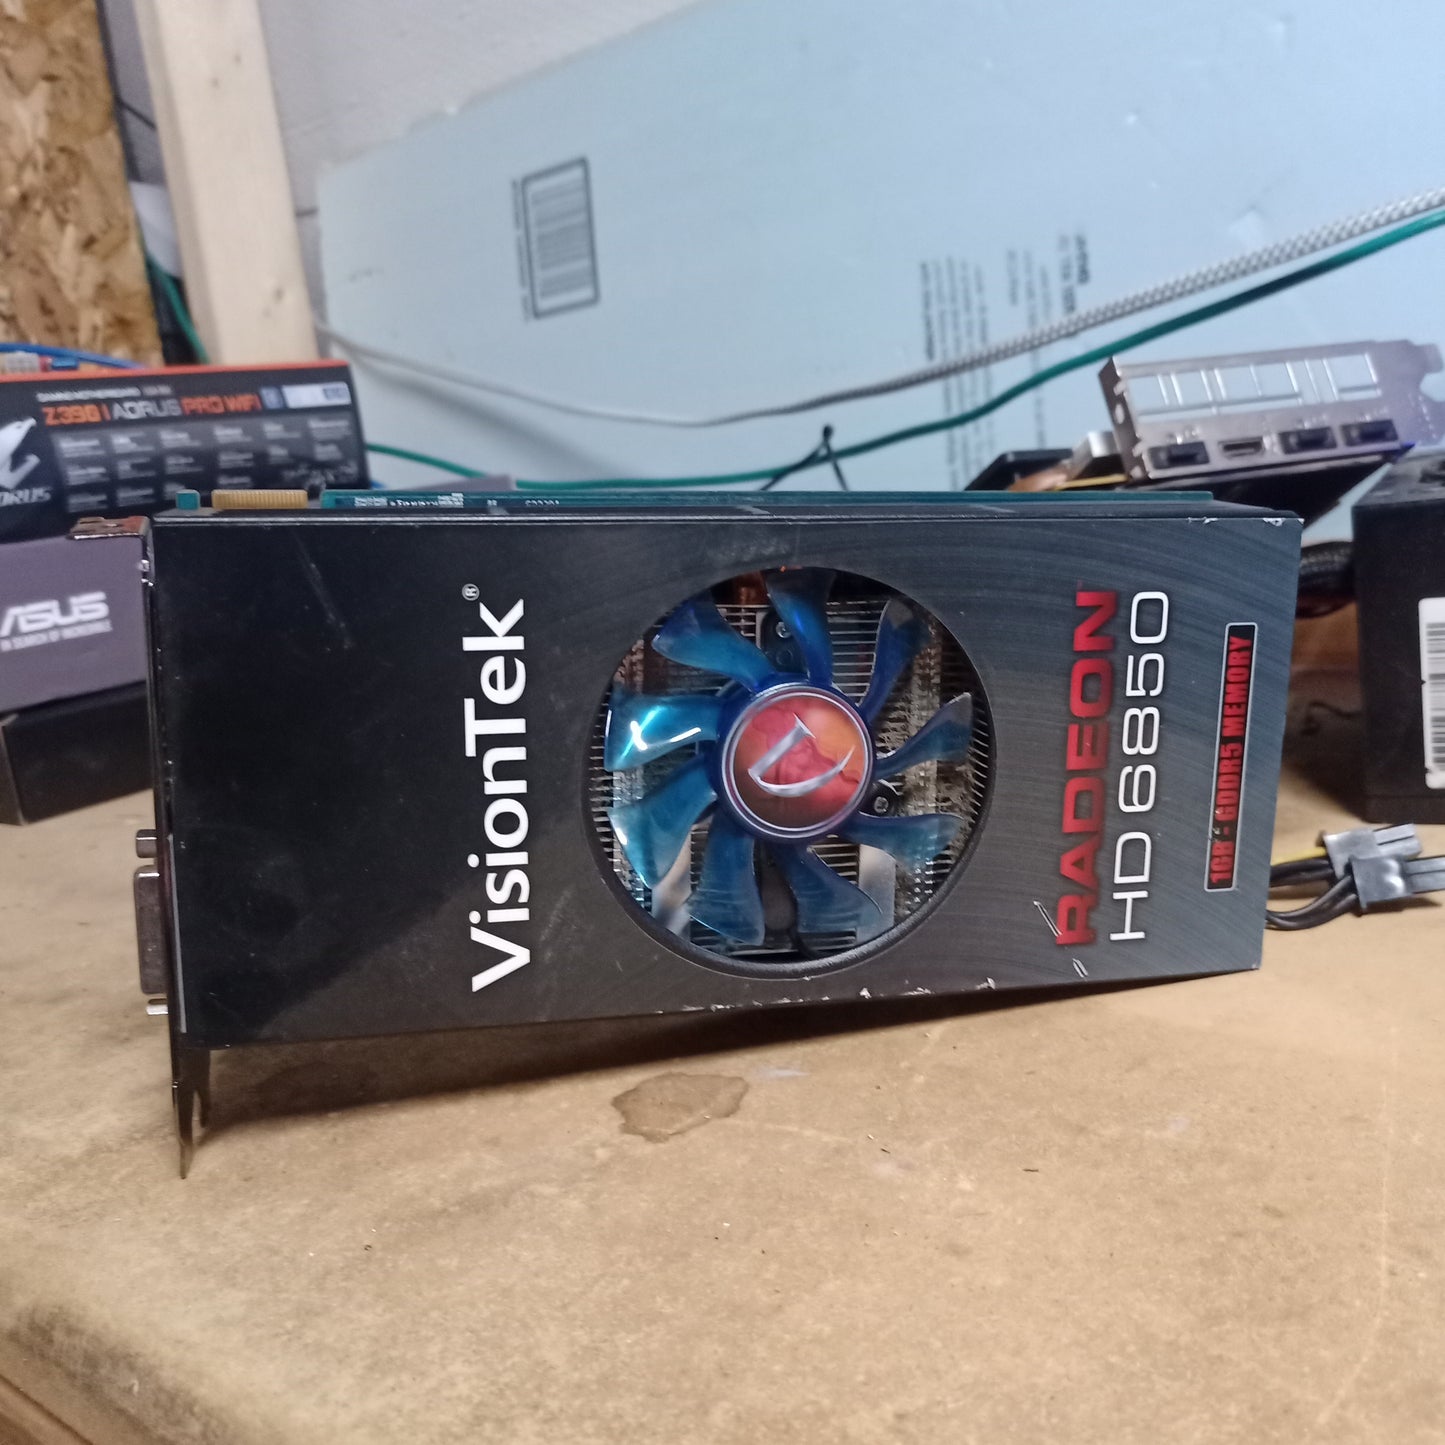 Radeon hd 6850 non working for parts